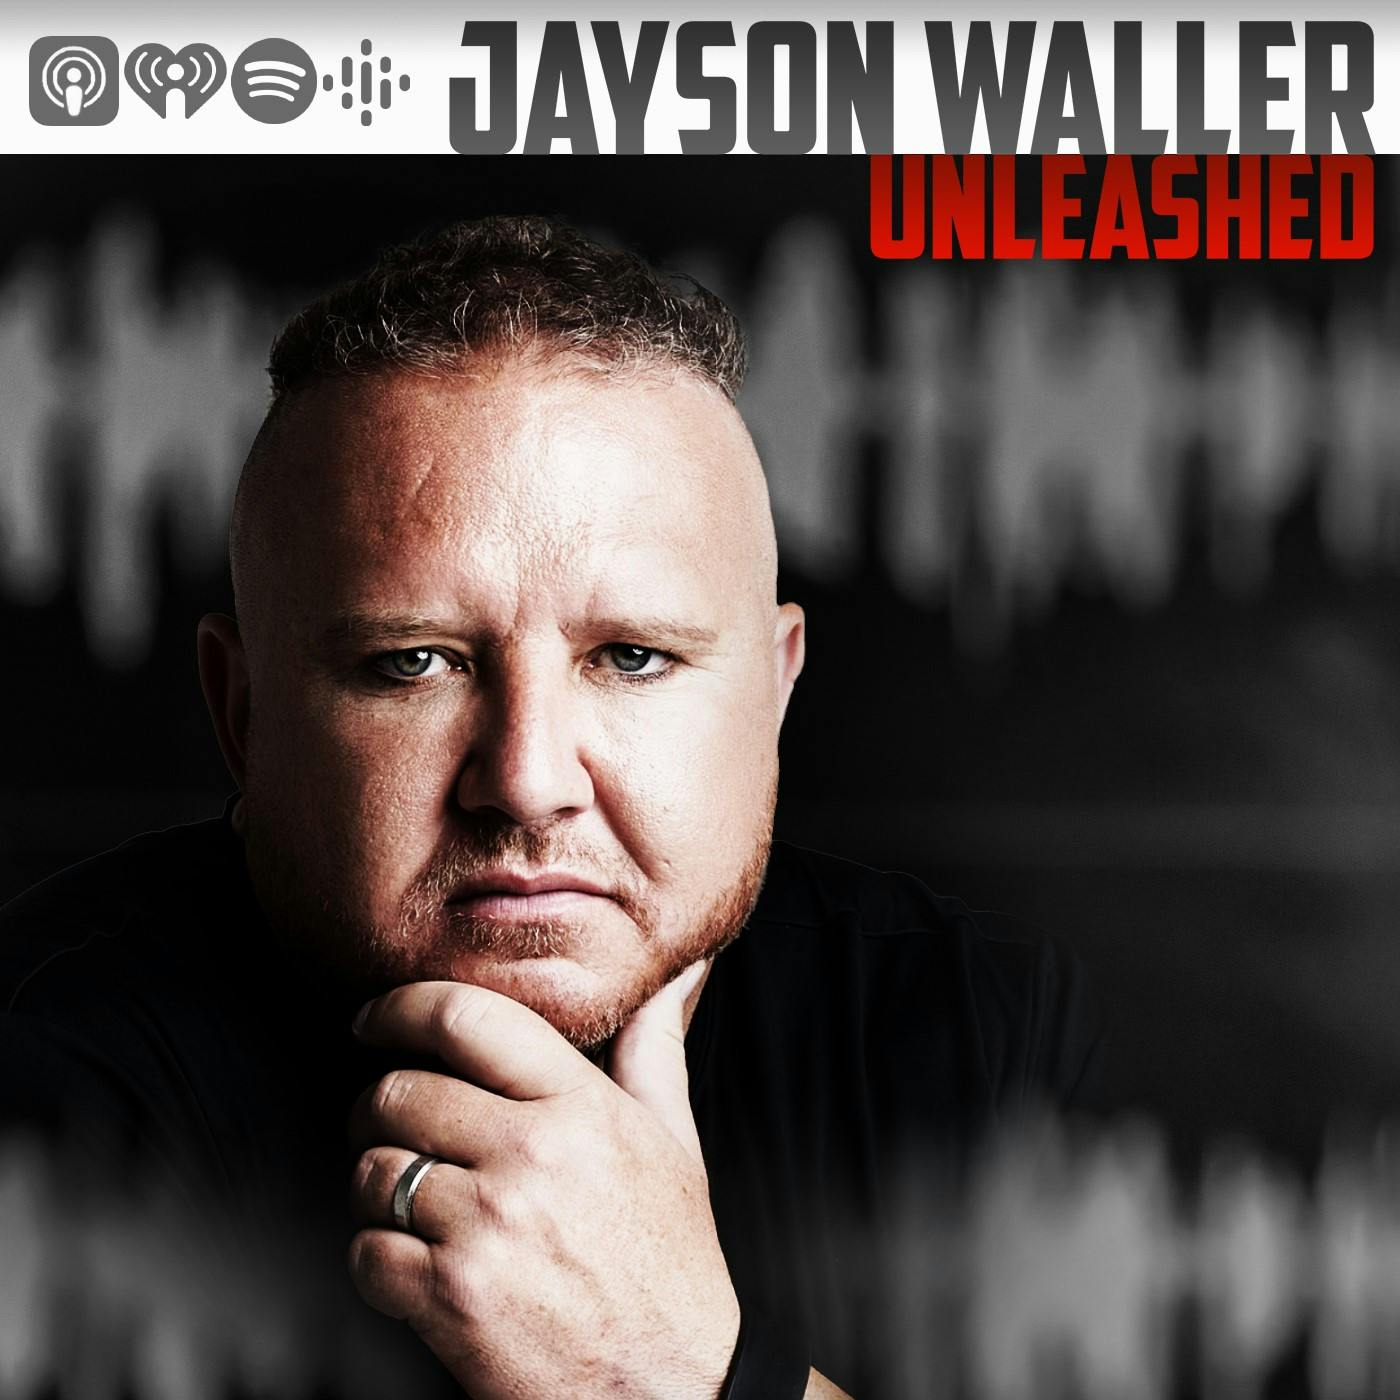 #72: Quirky Tales, Networking Adventures, and The BAM Fam with Jayson Waller